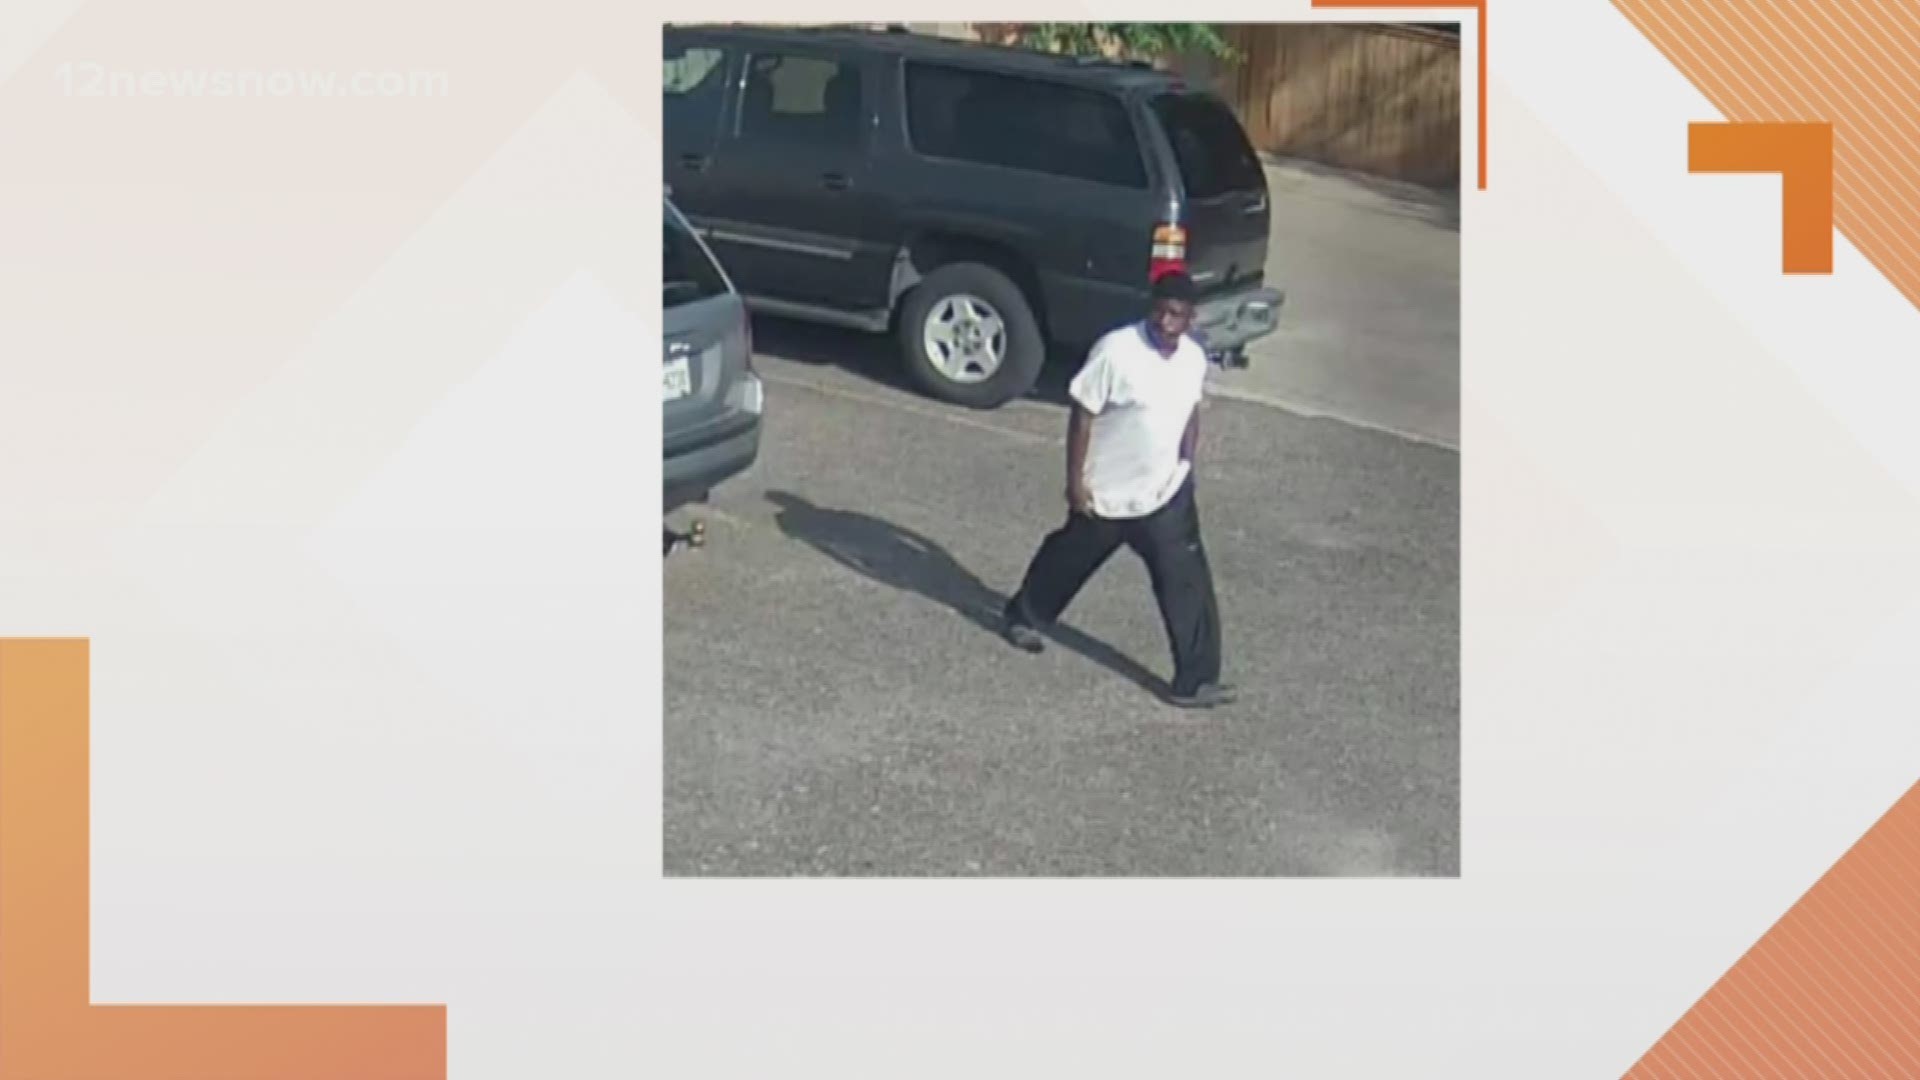 Beaumont Police are asking for your help in identifying this man. According to detectives, he broke into a vehicle in the 2500 block of Calder Avenue.